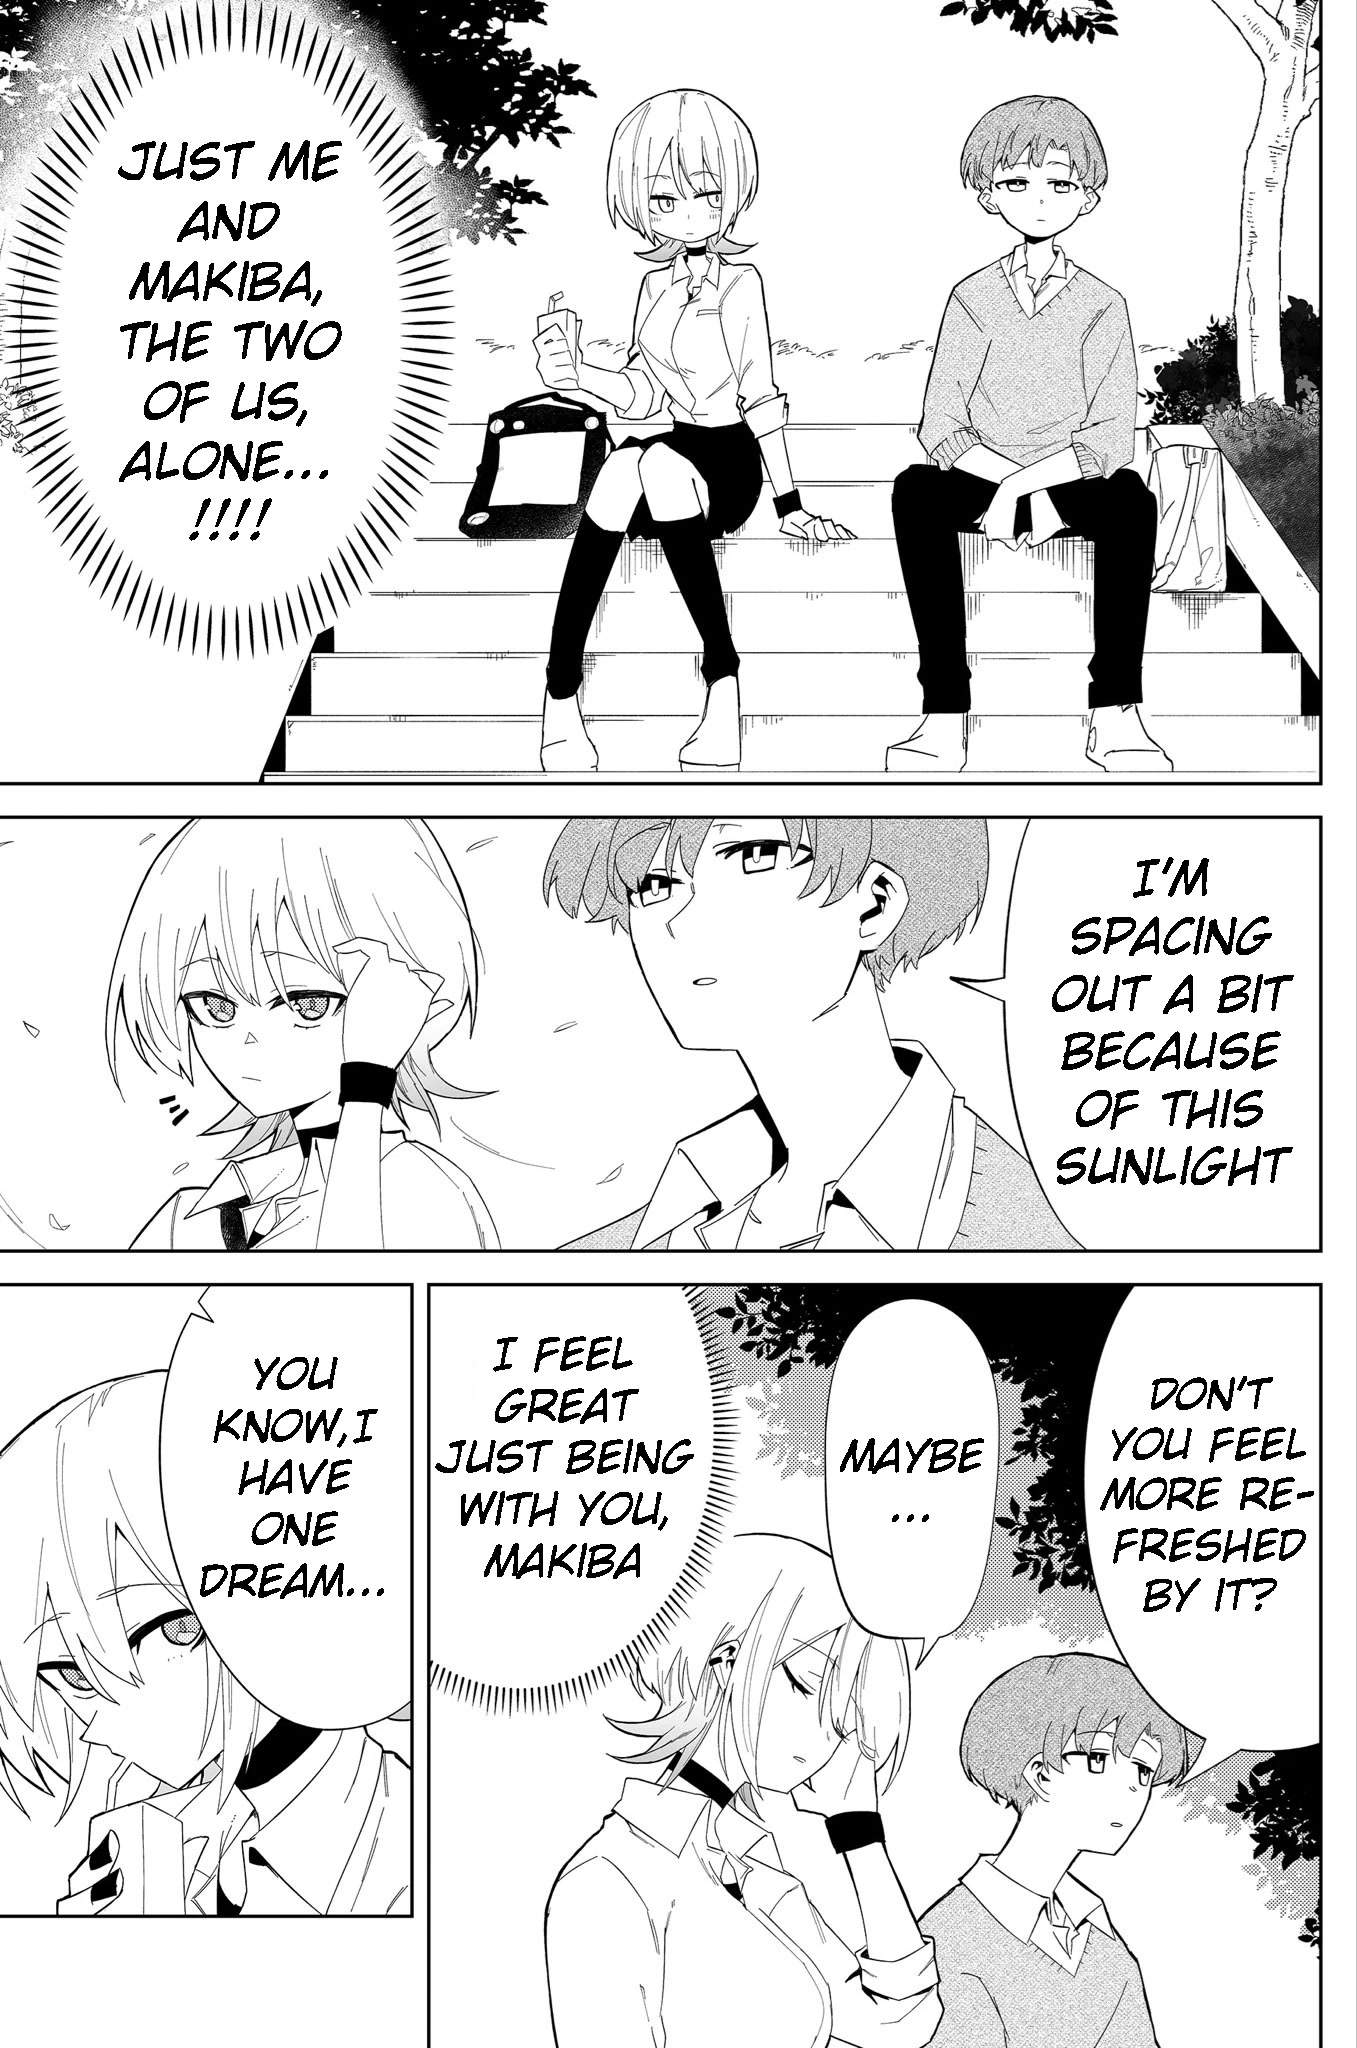 Wolf-chan Is Trying to Feign Indifference - chapter 5.5 - #4